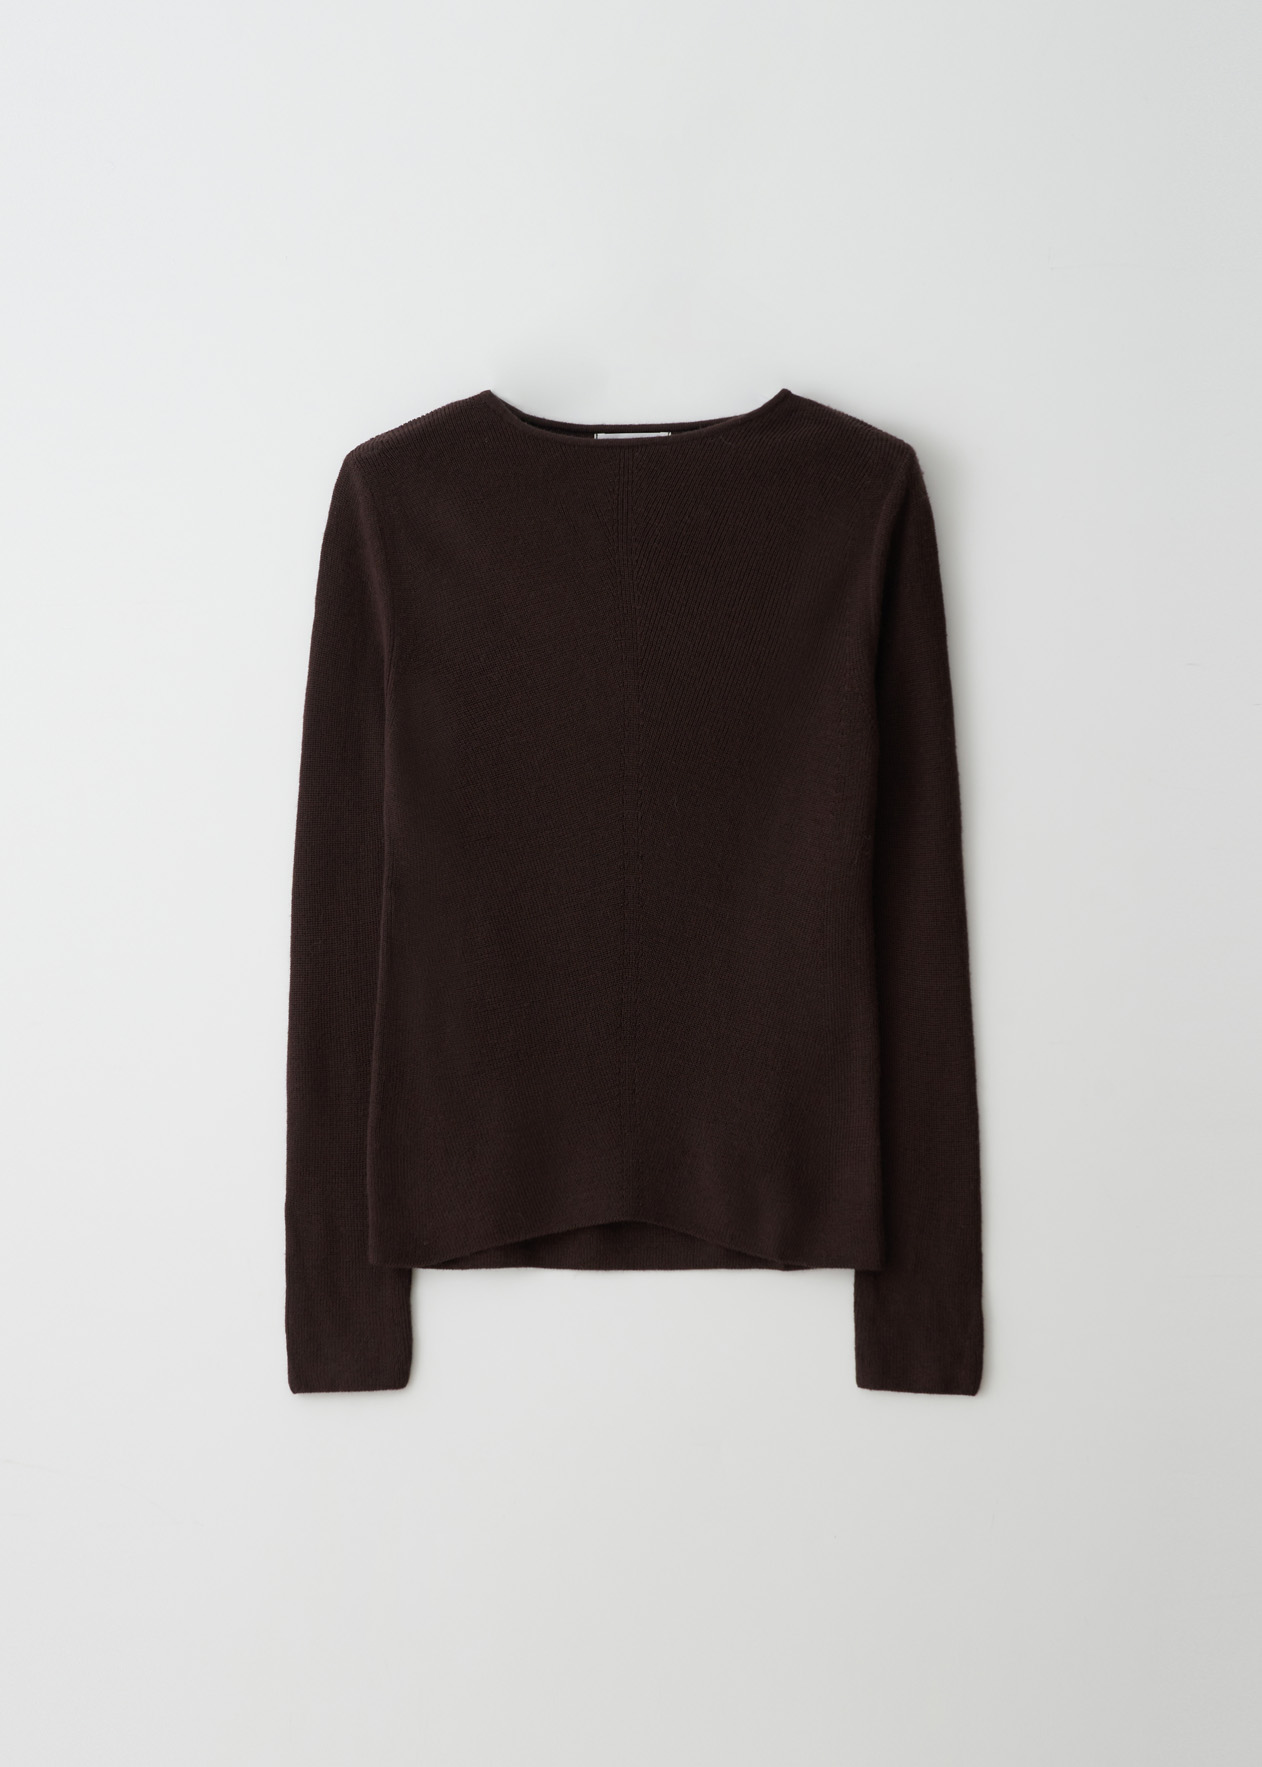 SALE_MAG knit